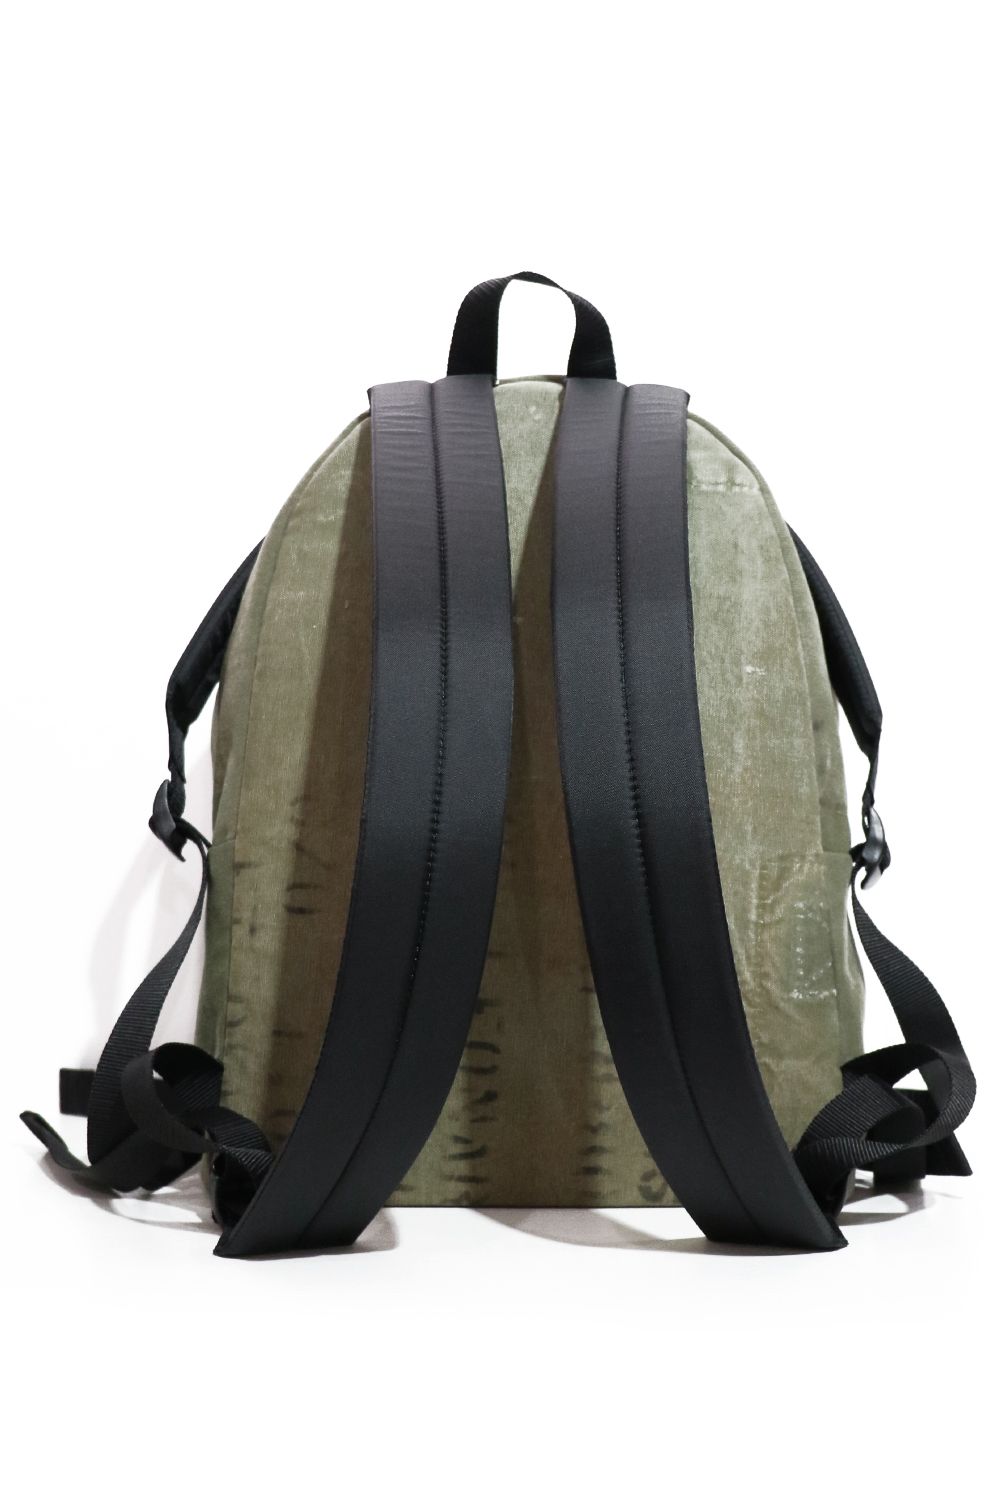 READYMADE   BACK PACK / バックパック   laid back